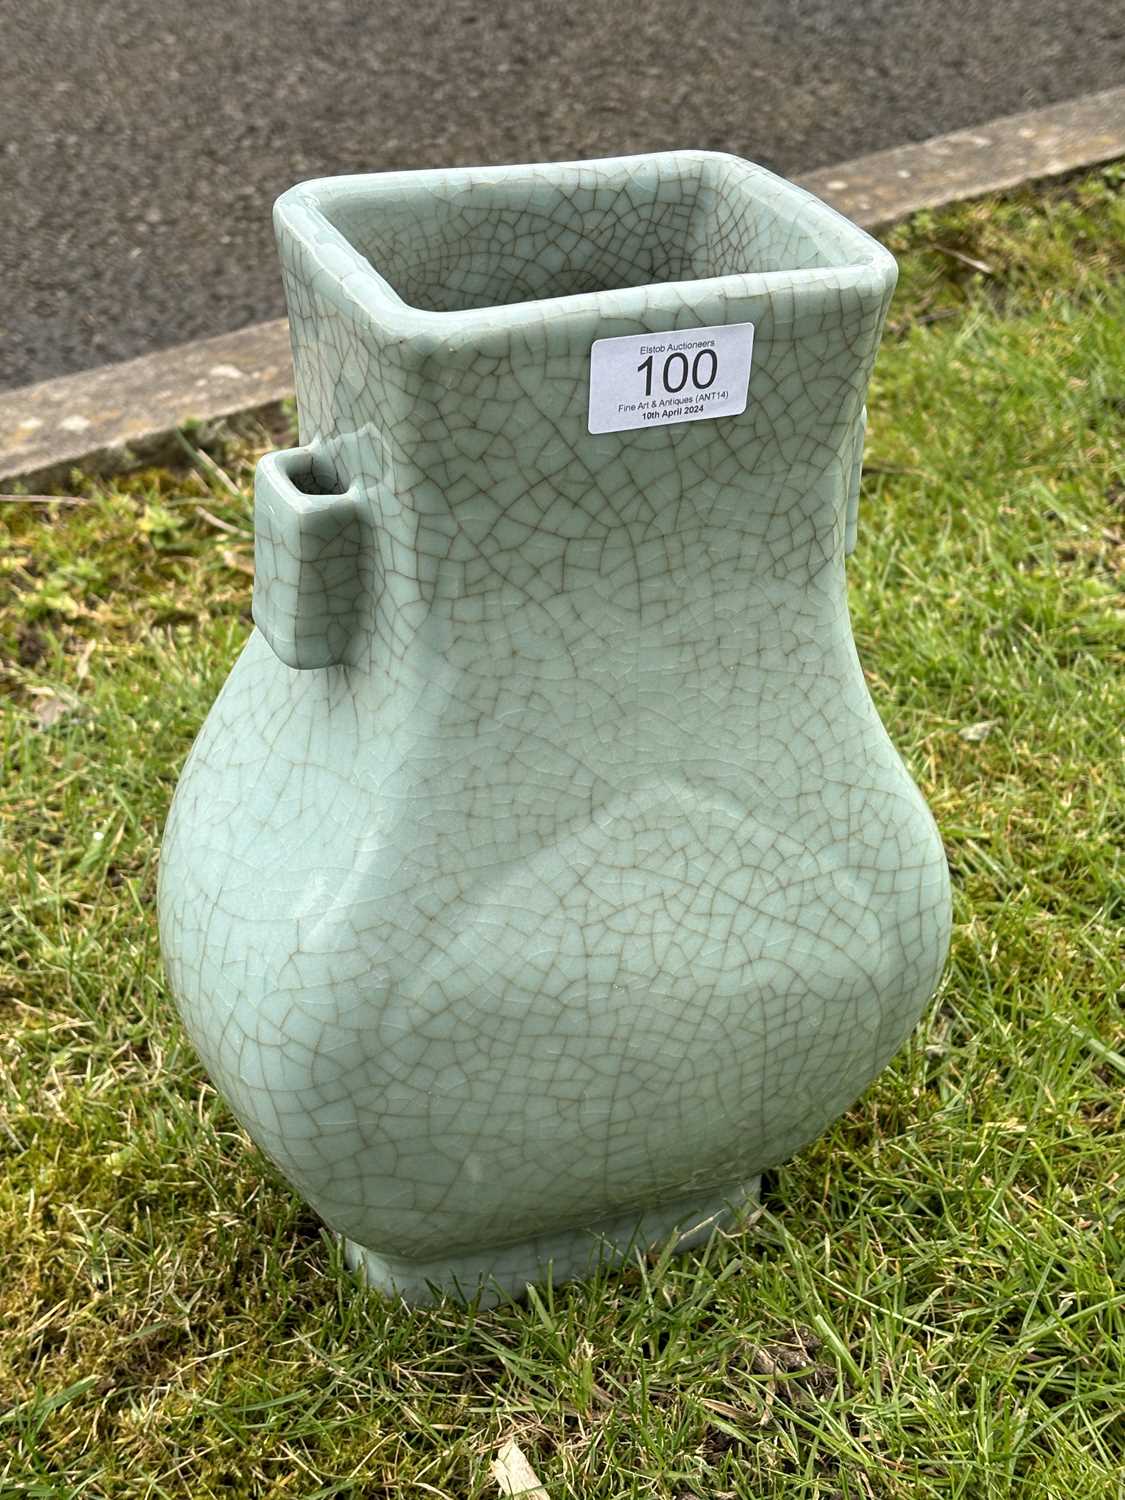 A GE-TYPE FACETED FANGHU-FORM VASE - Image 8 of 9